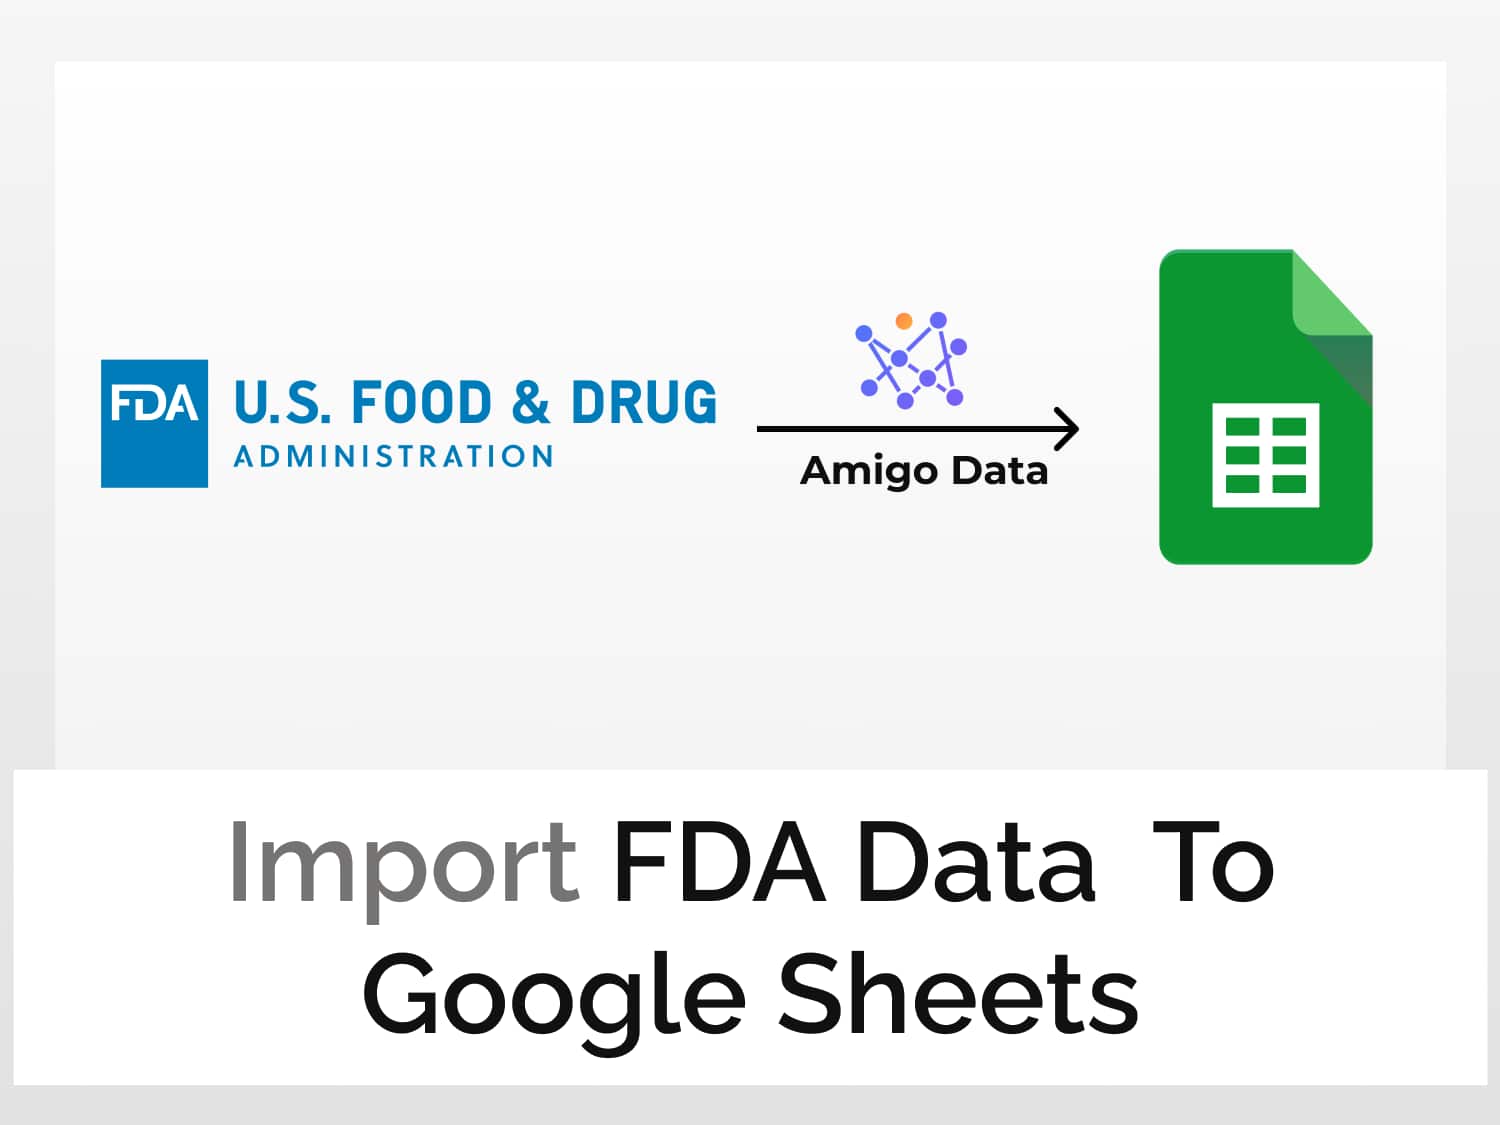 How to import data from the FDA to Google Sheets